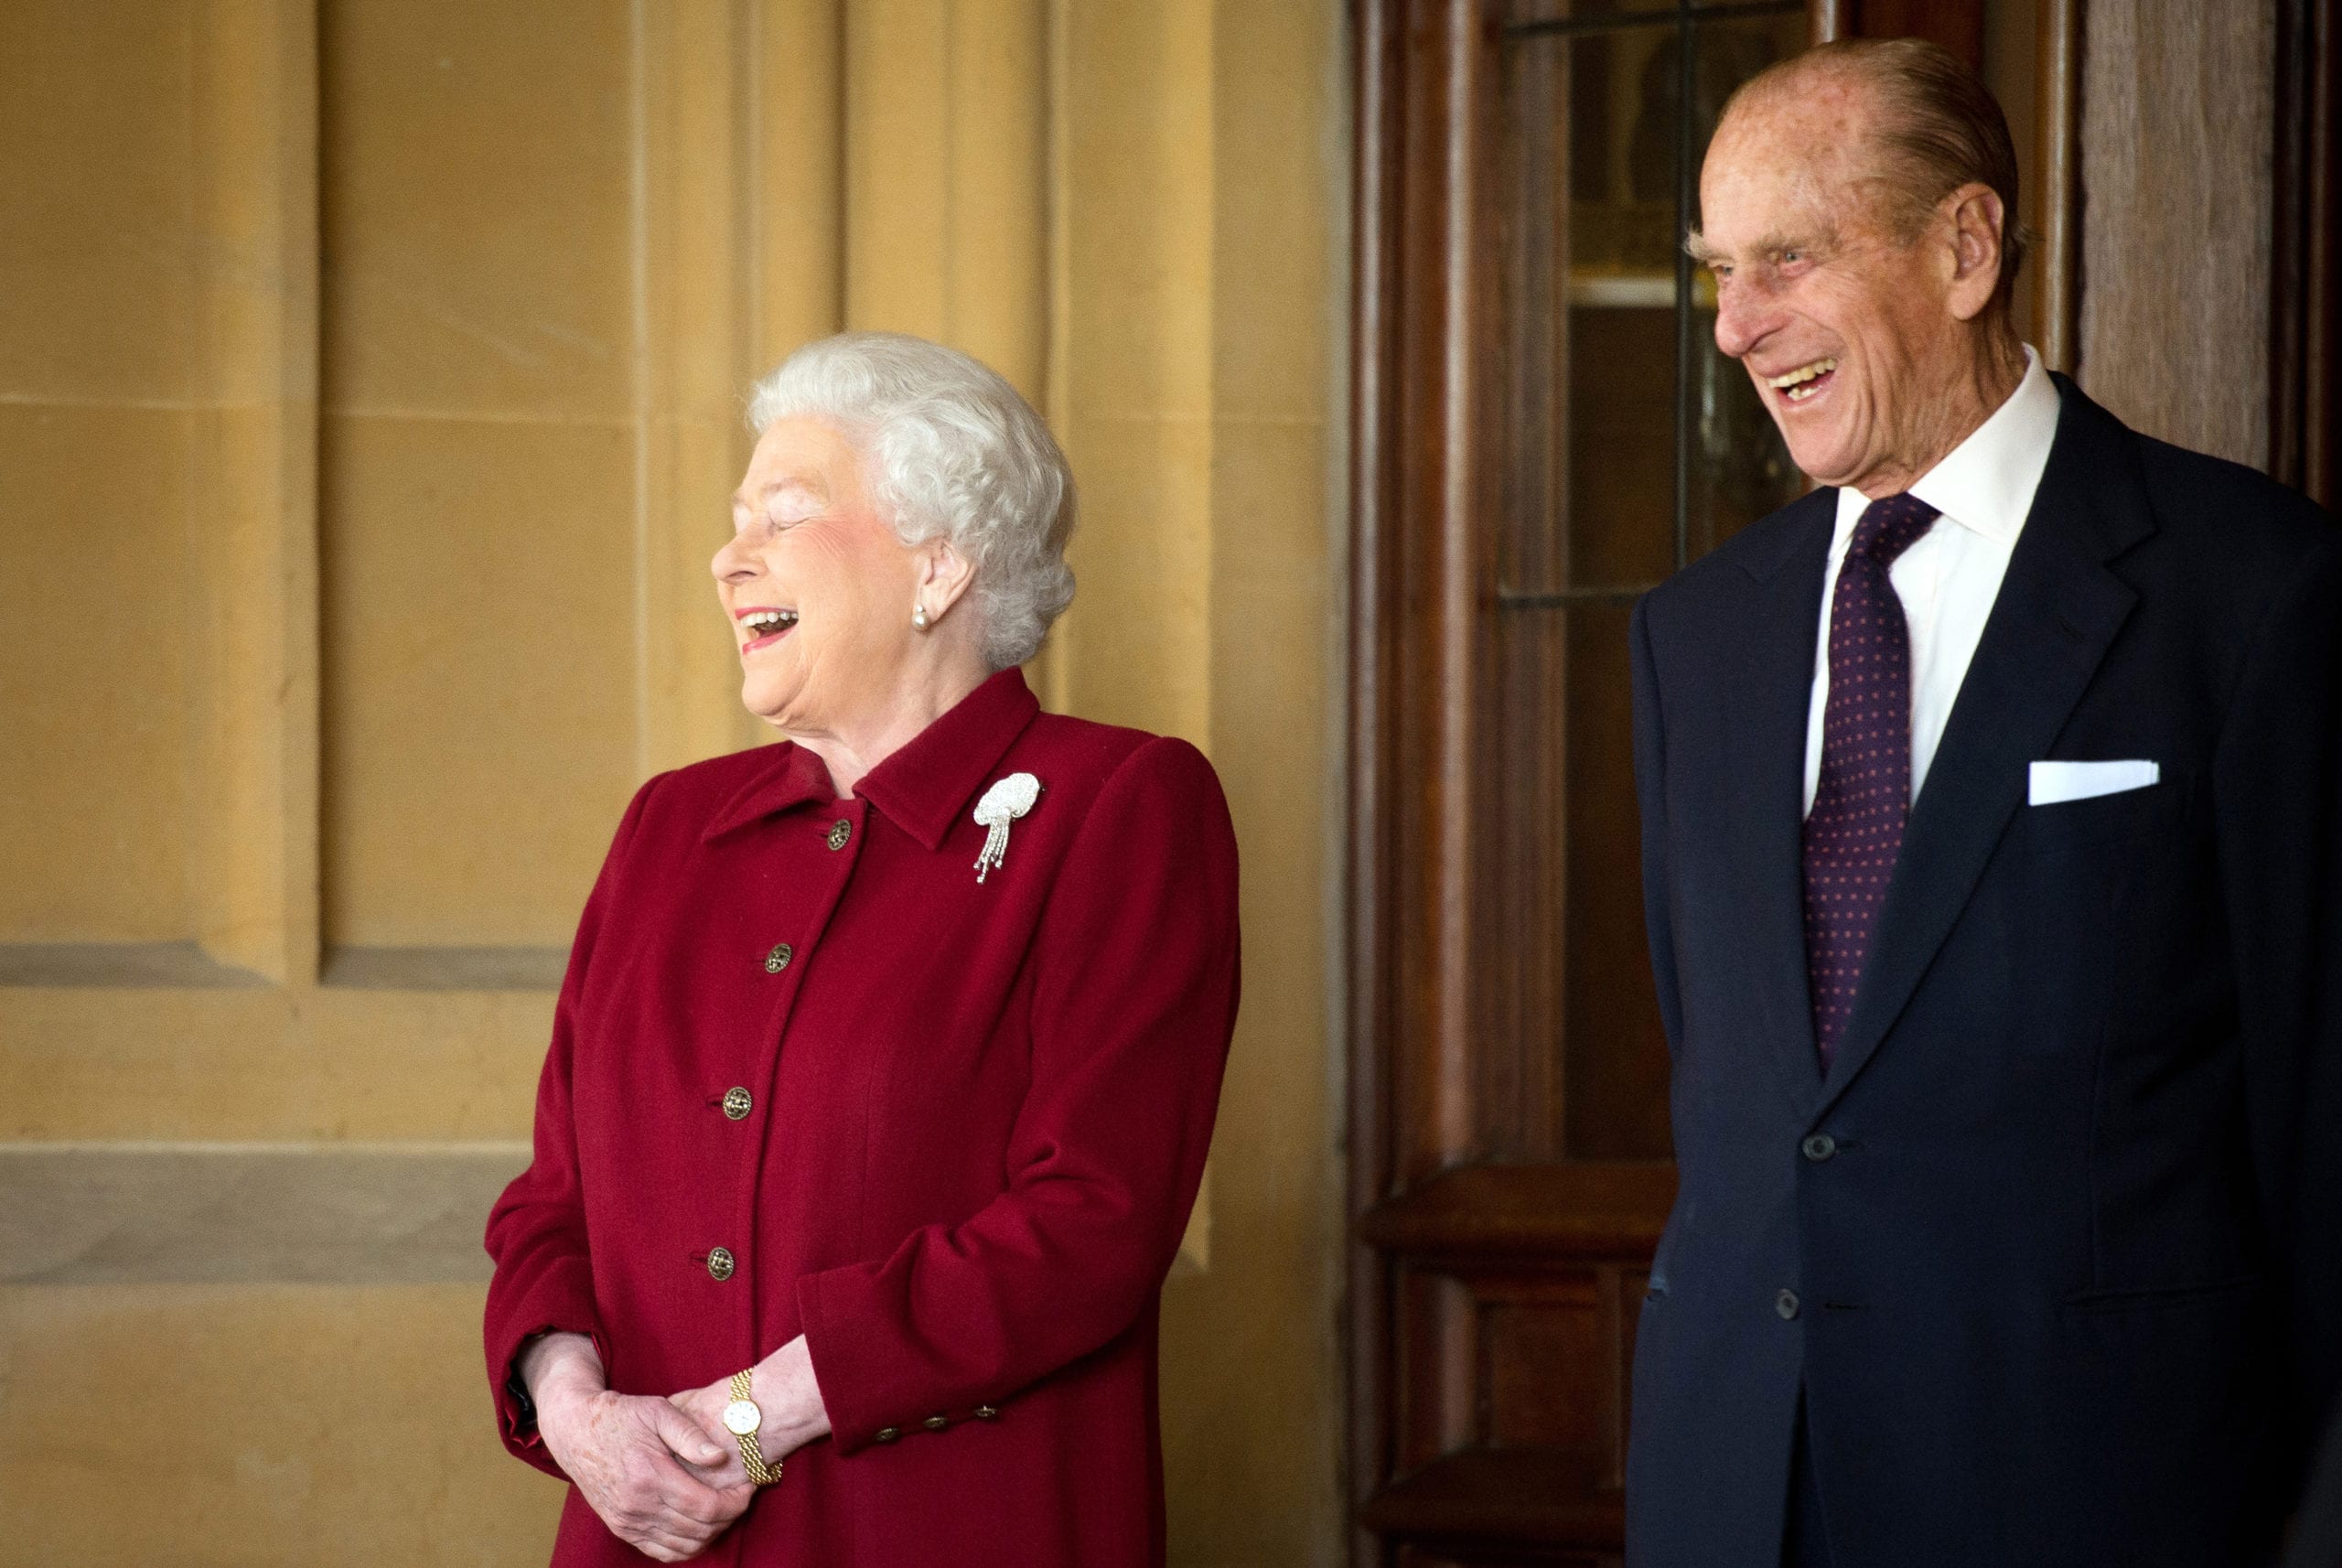 Britain's Queen Elizabeth and Prince Philip laugh after bidding farewell to the President of Ireland Michael D. Higgins and his wife Sabina at Windsor Castle in Windsor, southern England April 11, 2014.  The Irish President and his wife Sabina left Windsor at the end of a four day State Visit to Britain, during which they stayed at Windsor Castle as guests of Queen Elizabeth.  REUTERS/Leon Neal/Pool     (BRITAIN - Tags: ENTERTAINMENT SOCIETY ROYALS) - LM1EA4B125J01